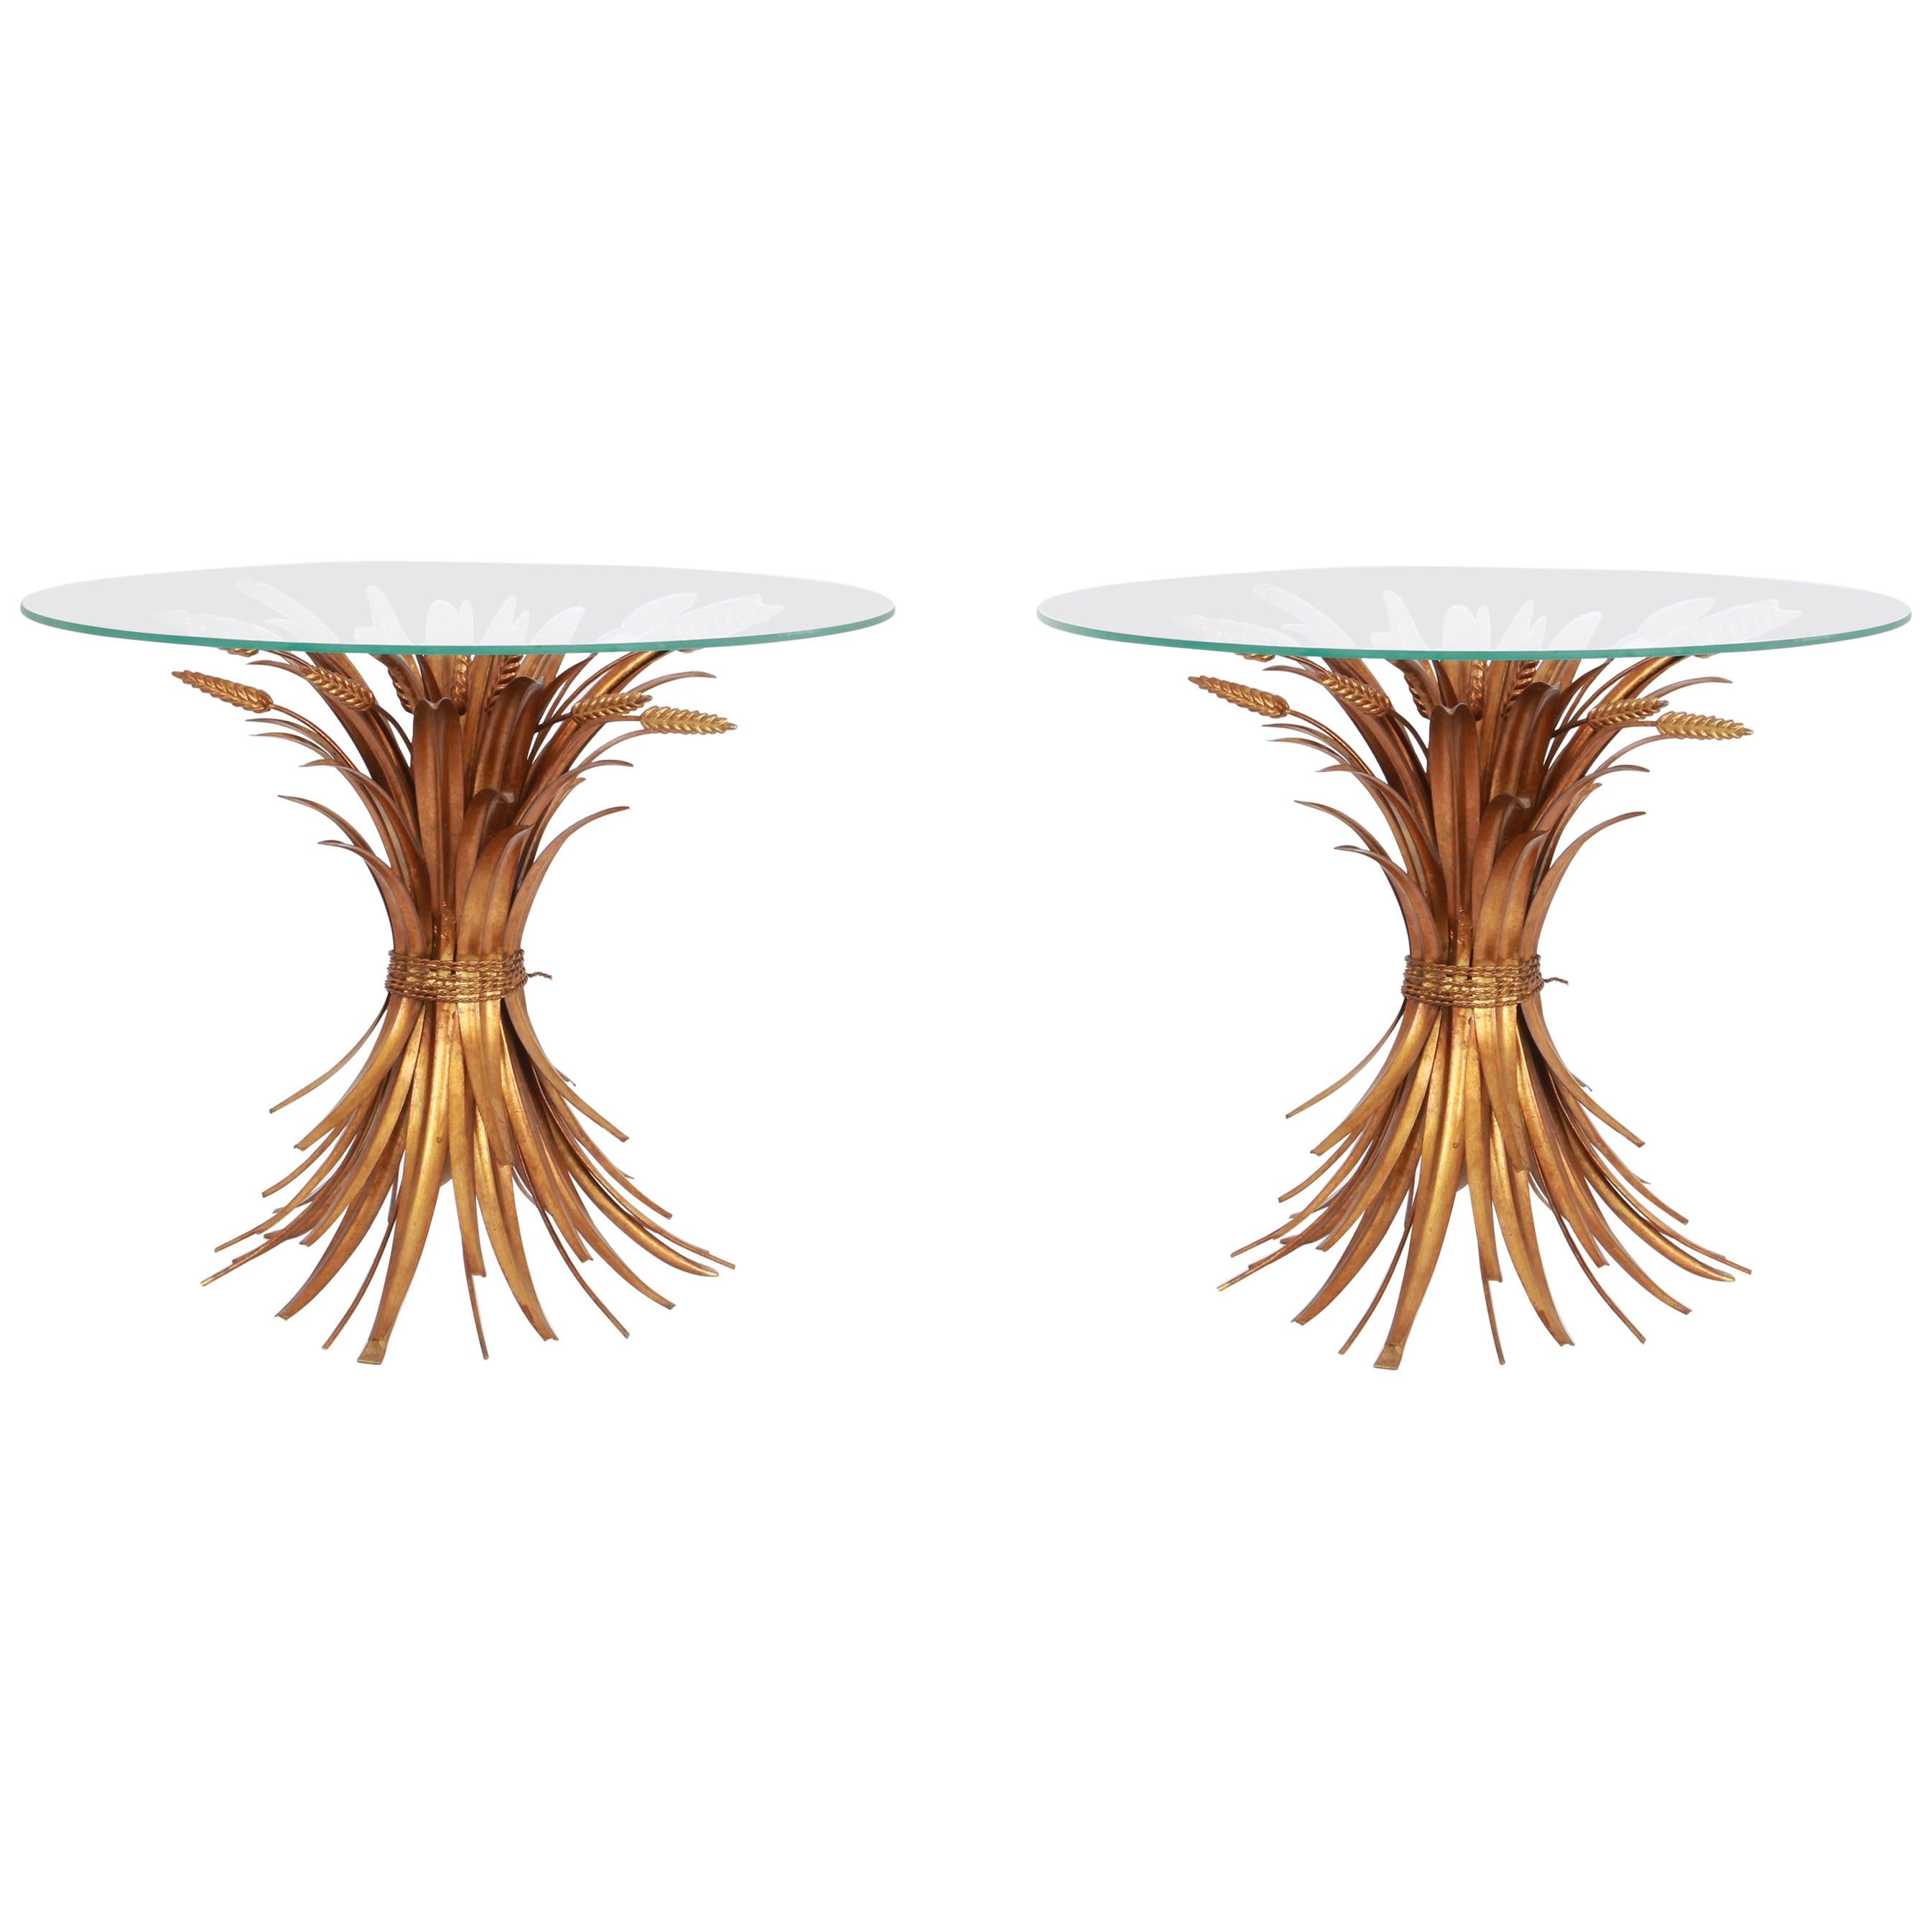 Set of 2 Regency Gilt Palm Tree and Wheat Coffee Table by Hans Kögl, 1970s